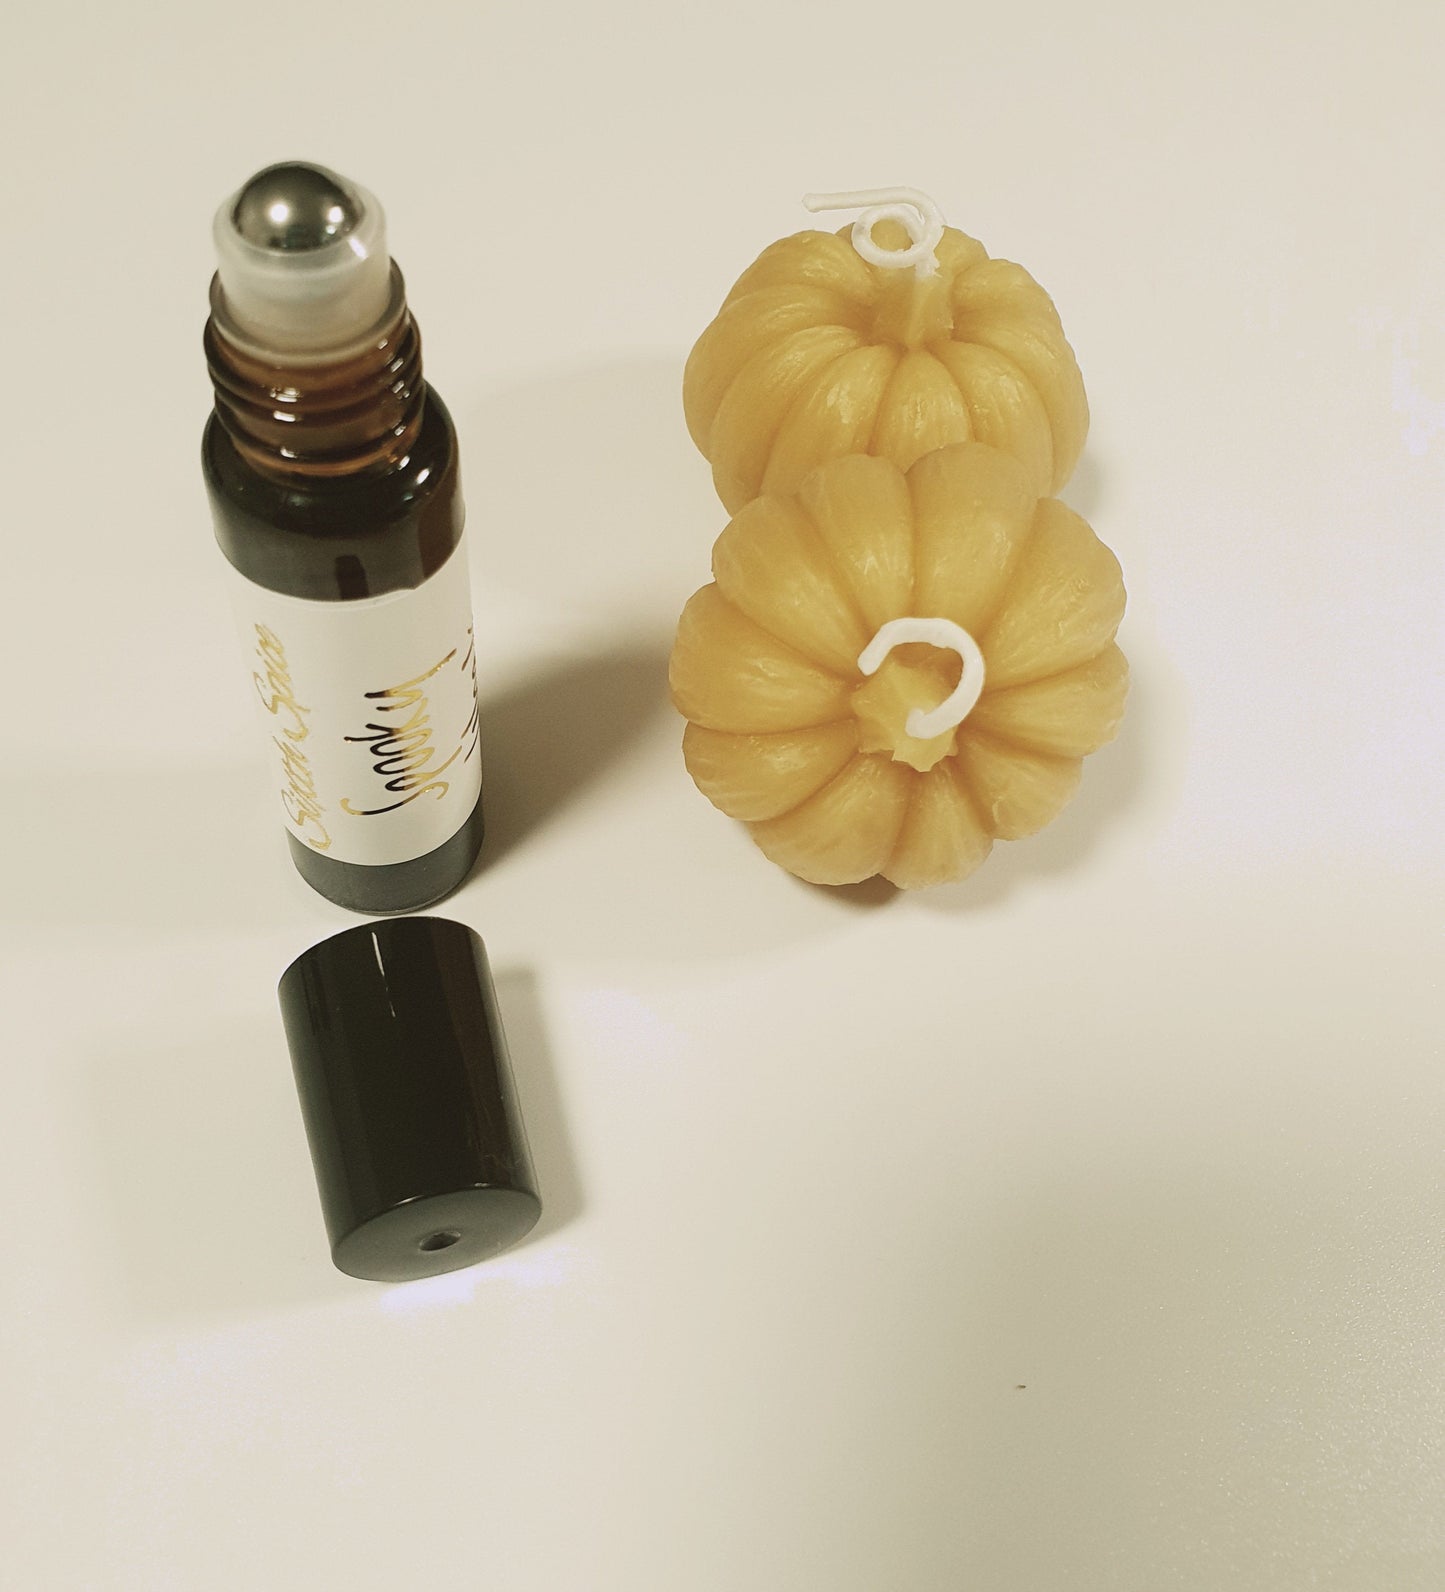 Haunted house - Natural perfume roller bottle